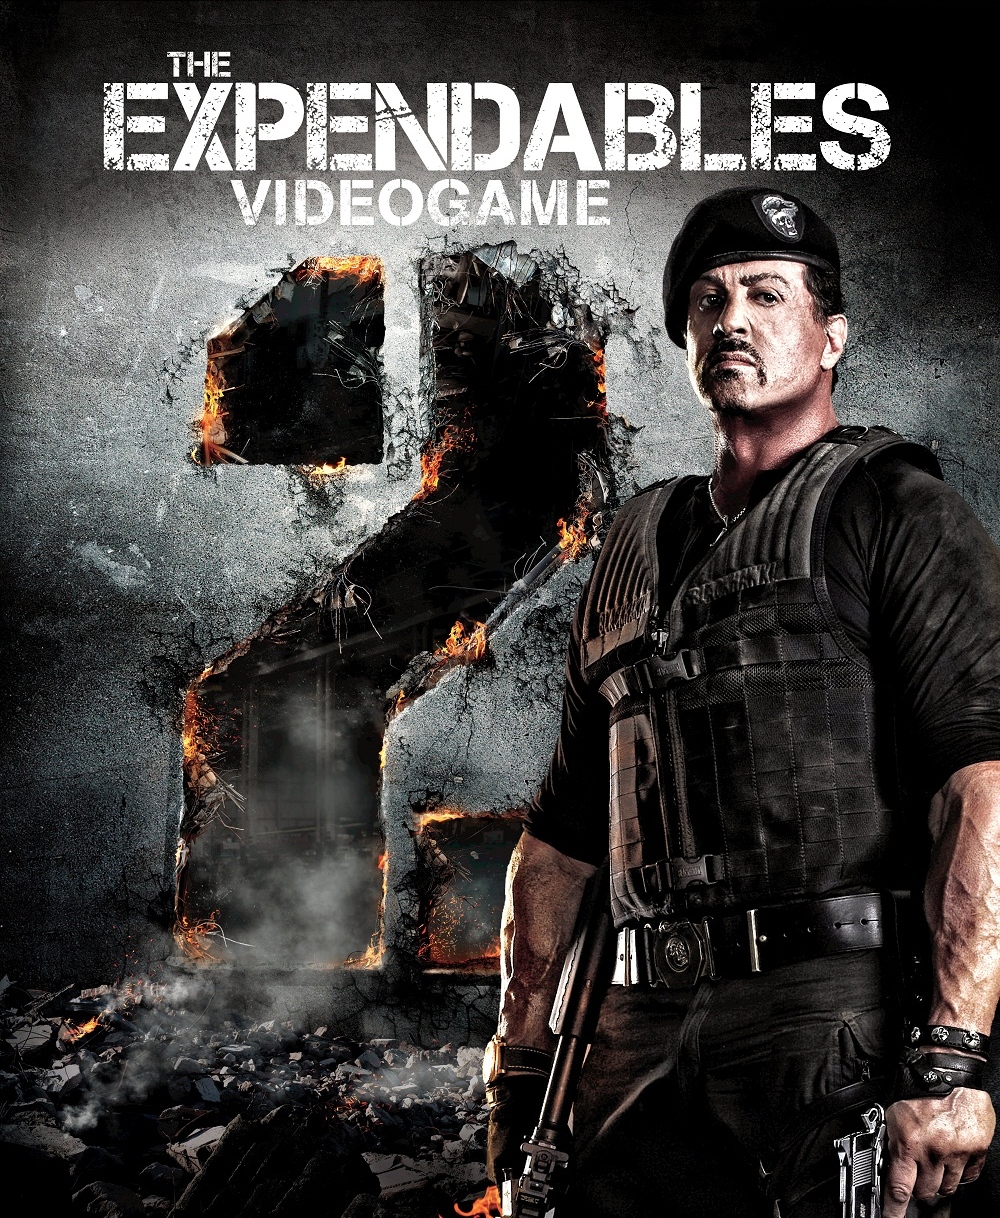 the-expendable 2